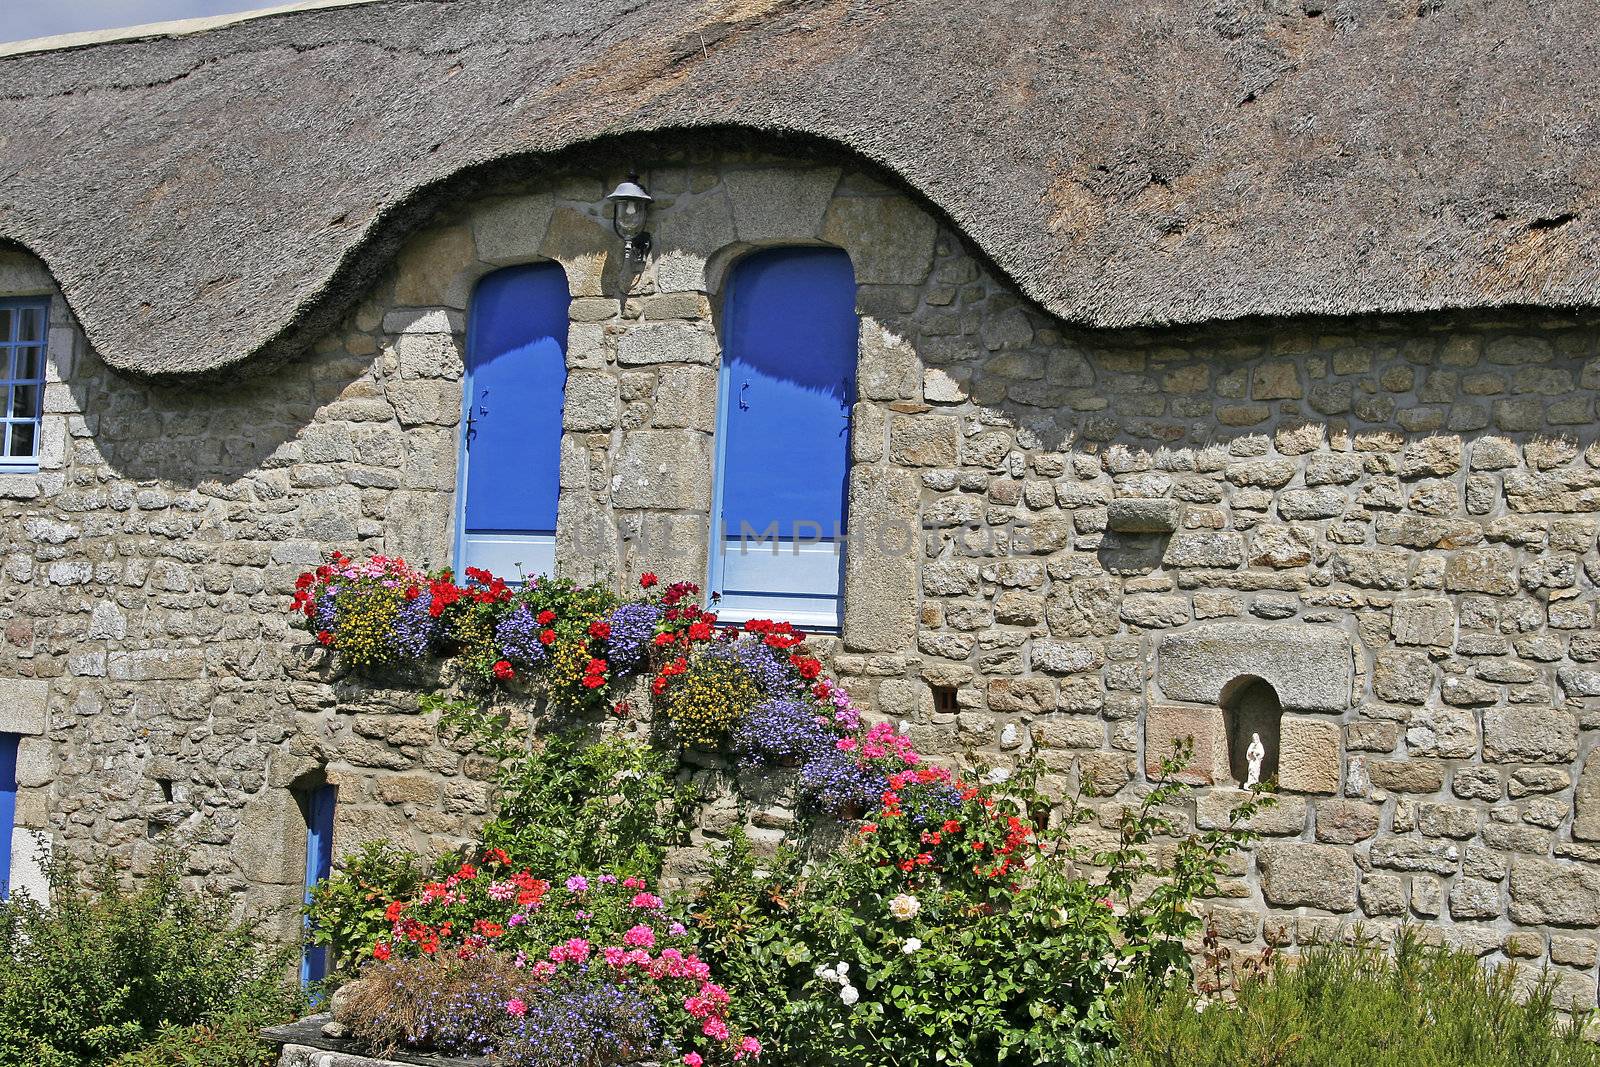 Thatching, House in Brittany, near Plourhanel, Brittany, North France. Plouharnel, Haus mit Reet-Dach, Reetdächer, Reetdach